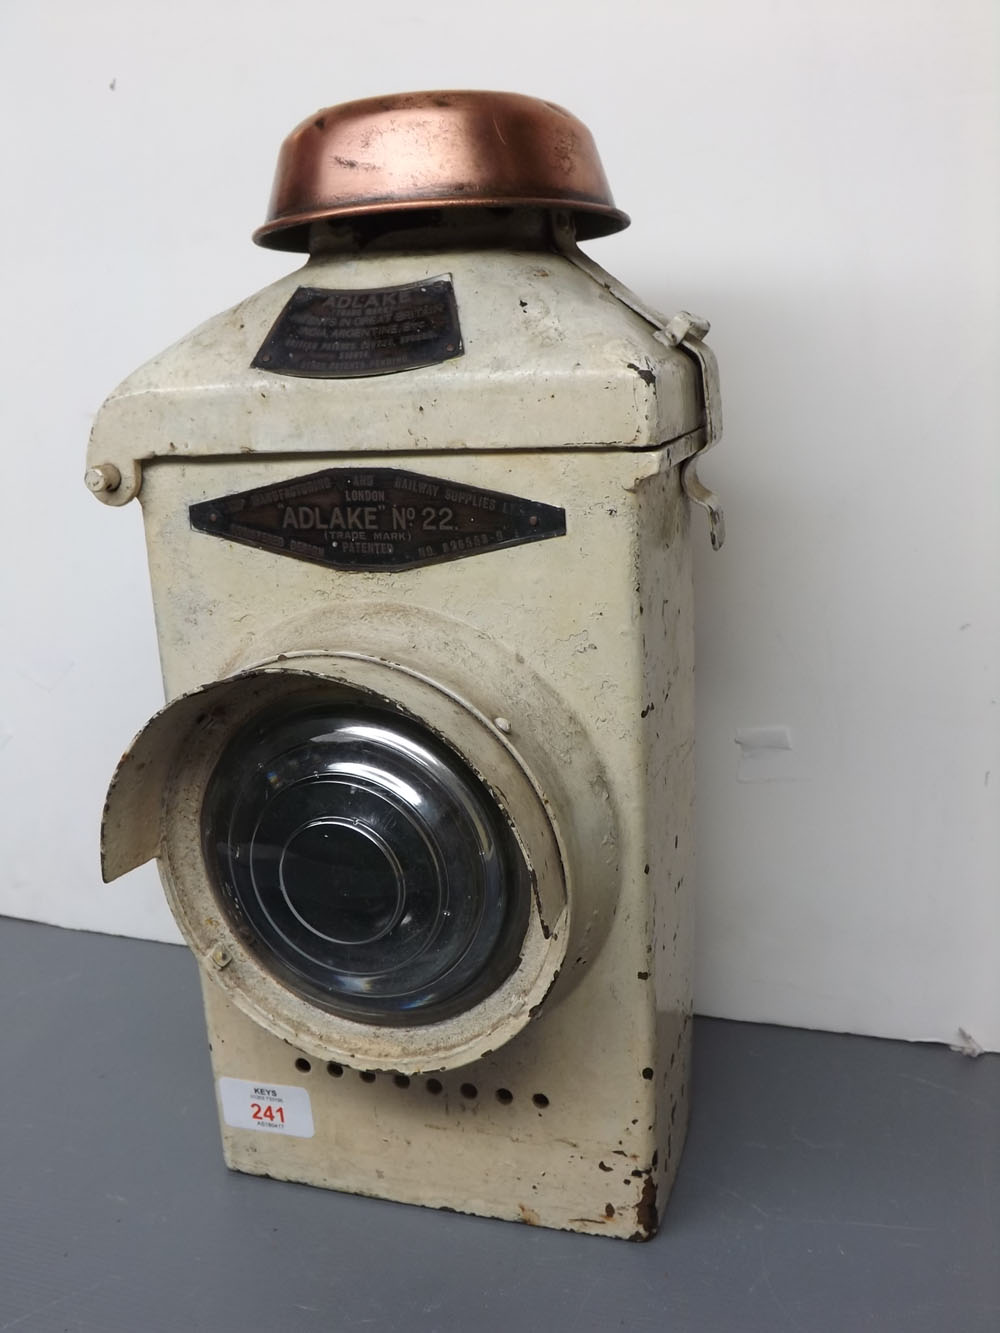 Adlake No 22 white painted railway lamp, number 826558-9, with bull's eye front glass and copper